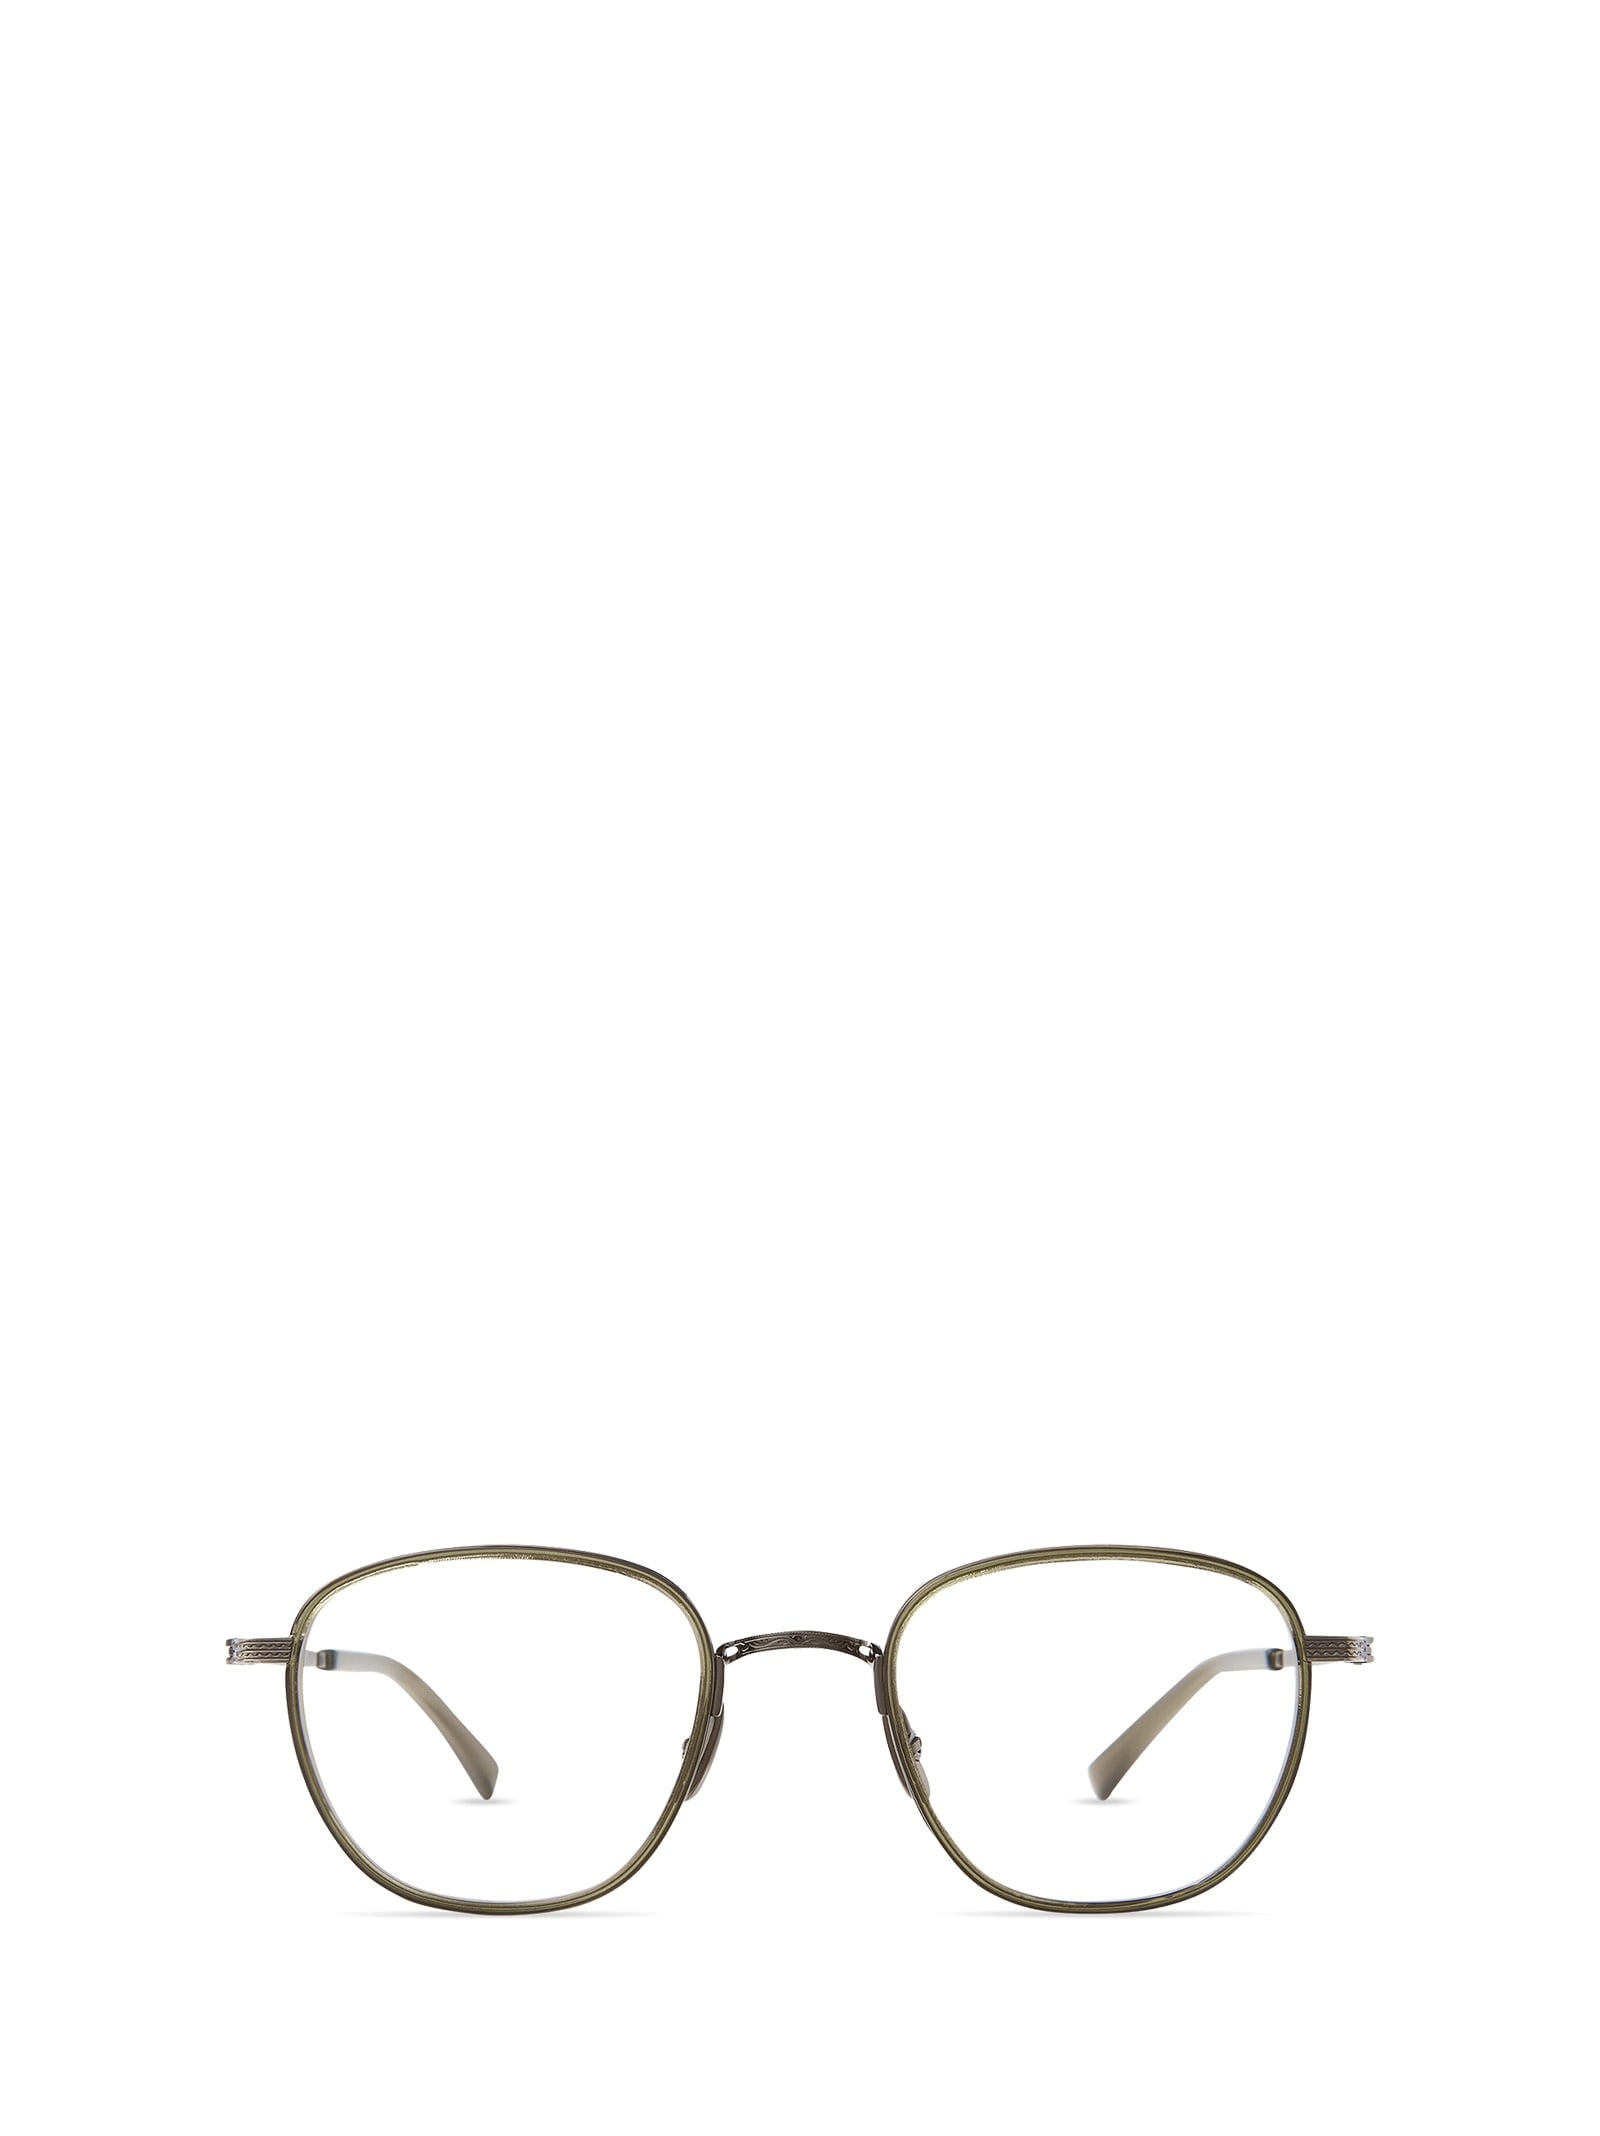 Mr Leight Griffith Ii C Limu-pewter Glasses